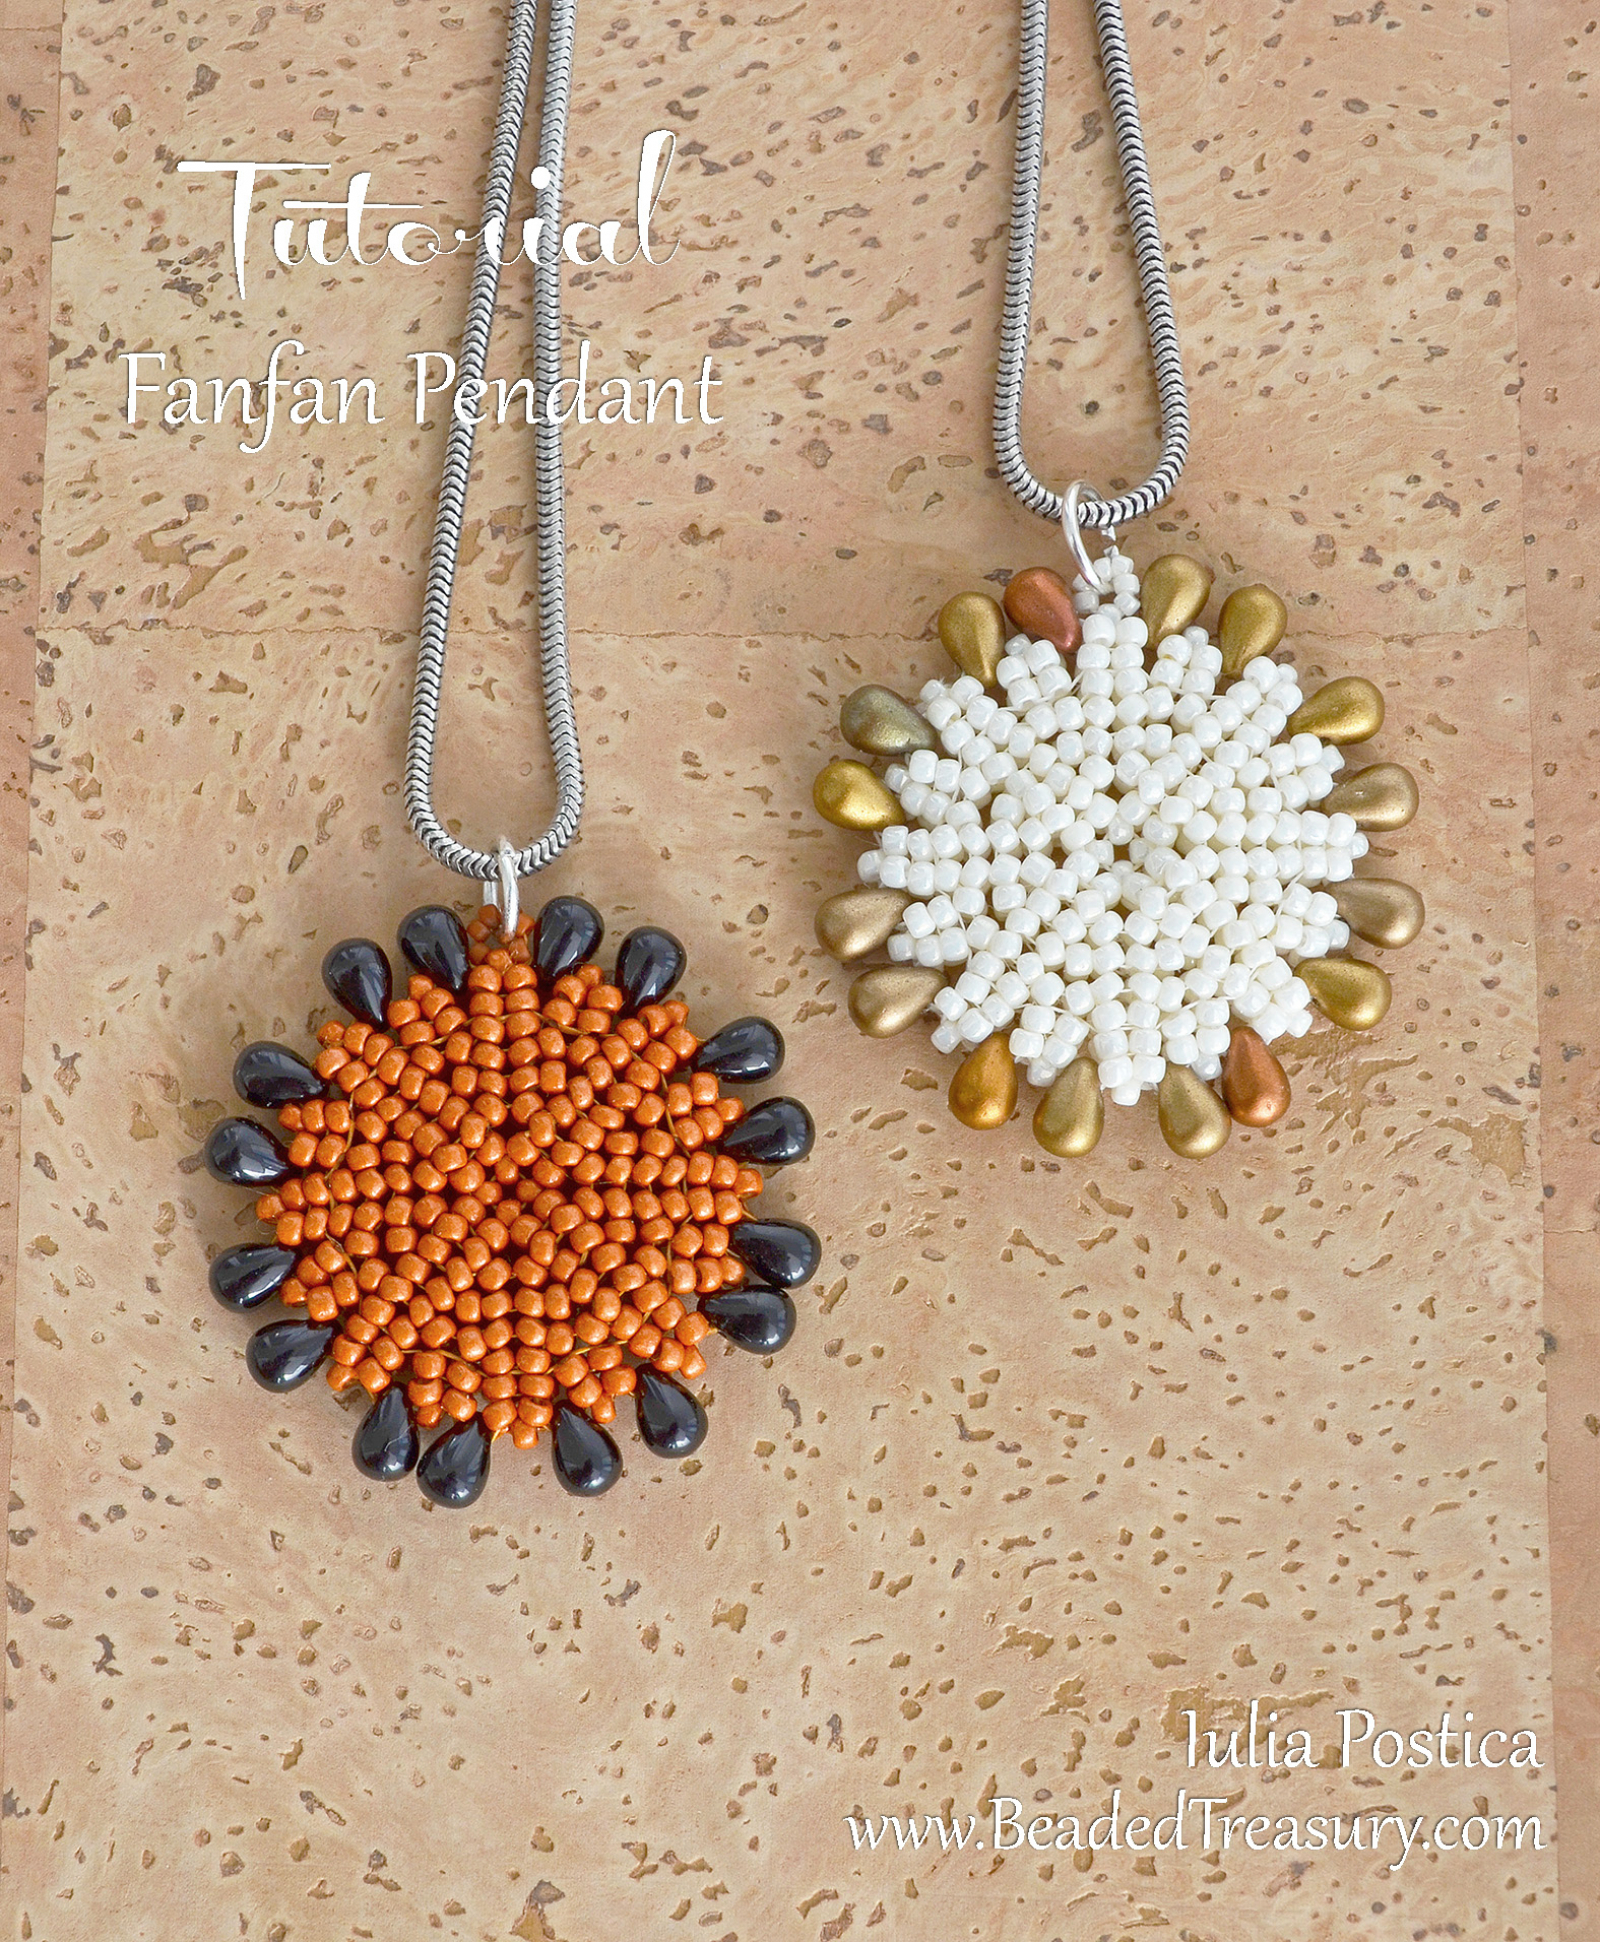 Beading Tutorial - FANFAN Pendant - Round pendant tutorial with seed beads  and drops - Herringbone beading pattern - Instant PDF Download